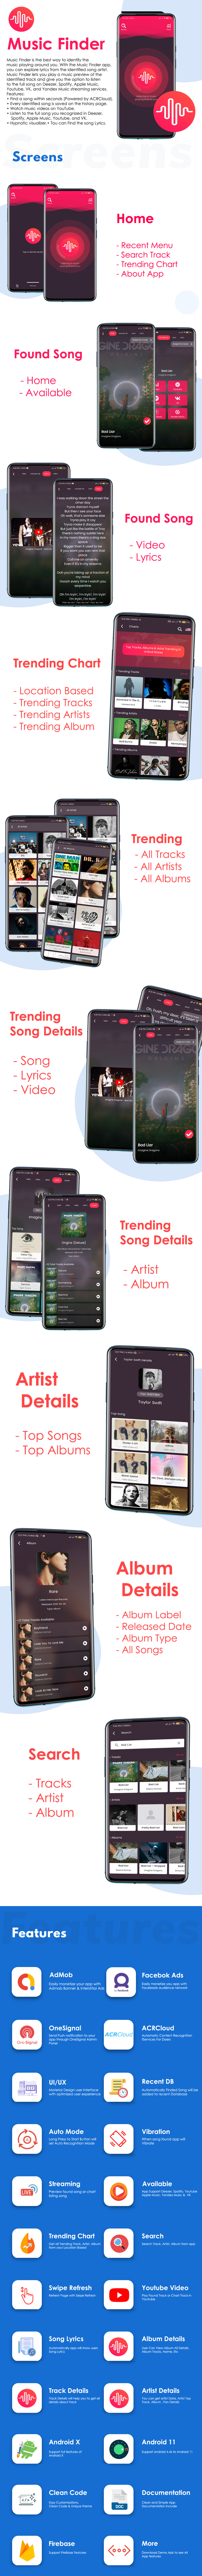 Music Finder - Audio & Lyrics Recognition, Trending & Music Search, Shazam Clone with Admob & Fan - 3